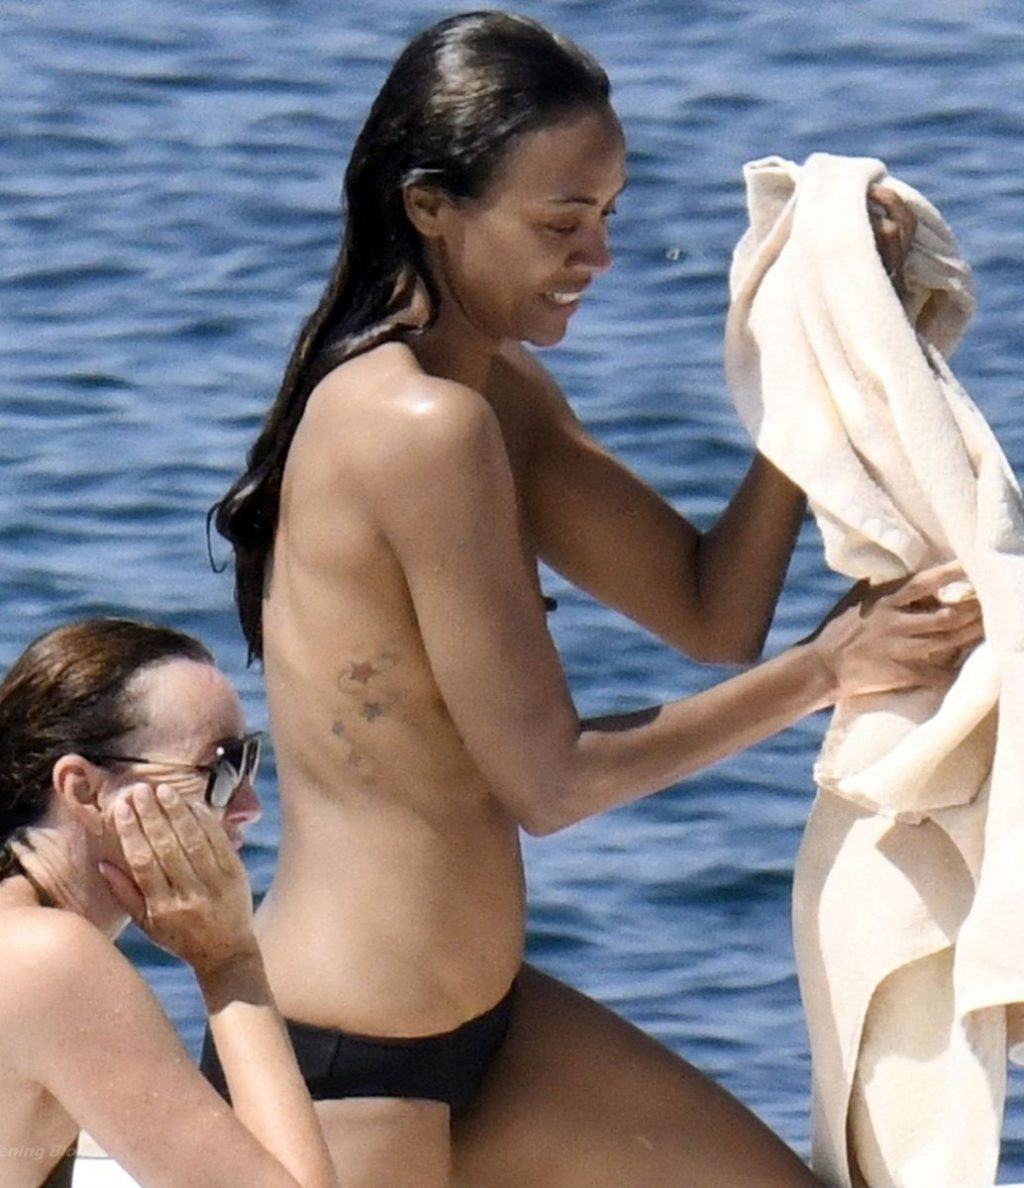 Marvels Guardians Of The Galaxy Actress Zoe Saldana Shows Her Nude Tits In Sardinia